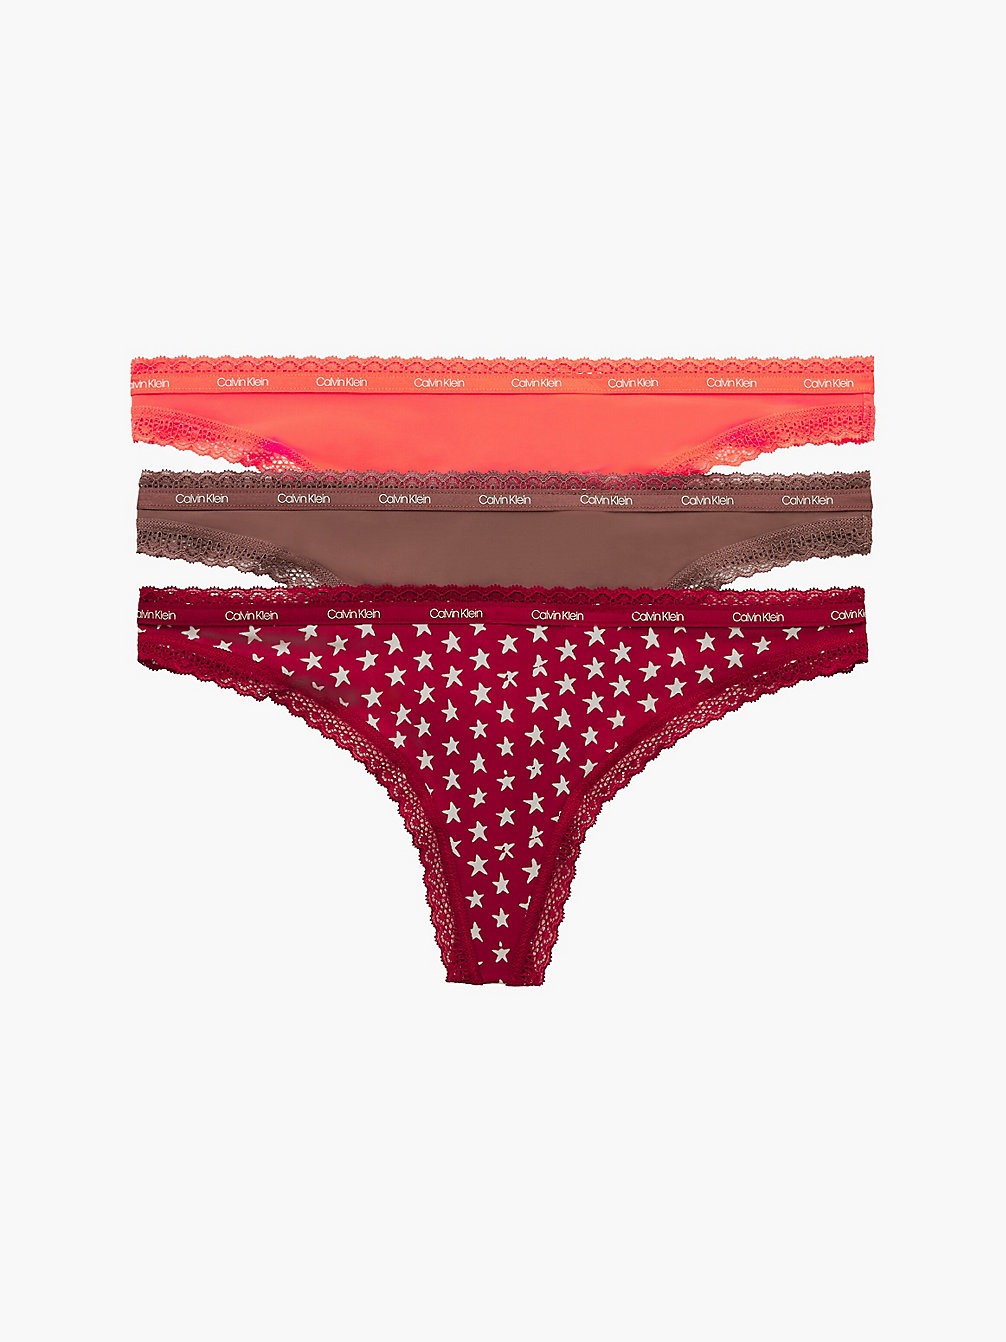 STAR STAMP_RED/BURNT EMBERS/CAMEL 3-Pack Strings - Bottoms Up undefined dames Calvin Klein